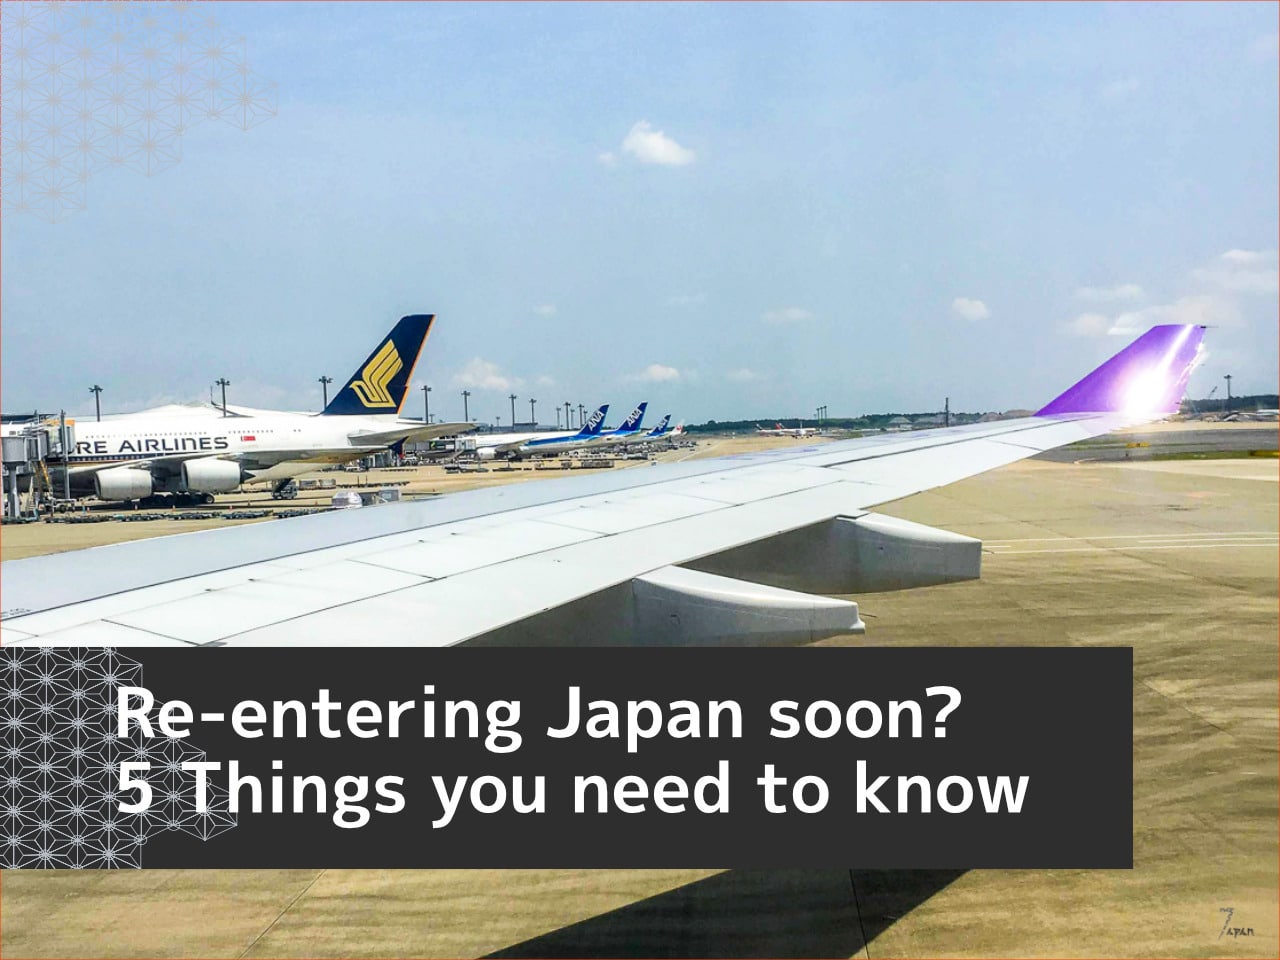 5 things you need to know if you plan to re-enter Japan in 2020